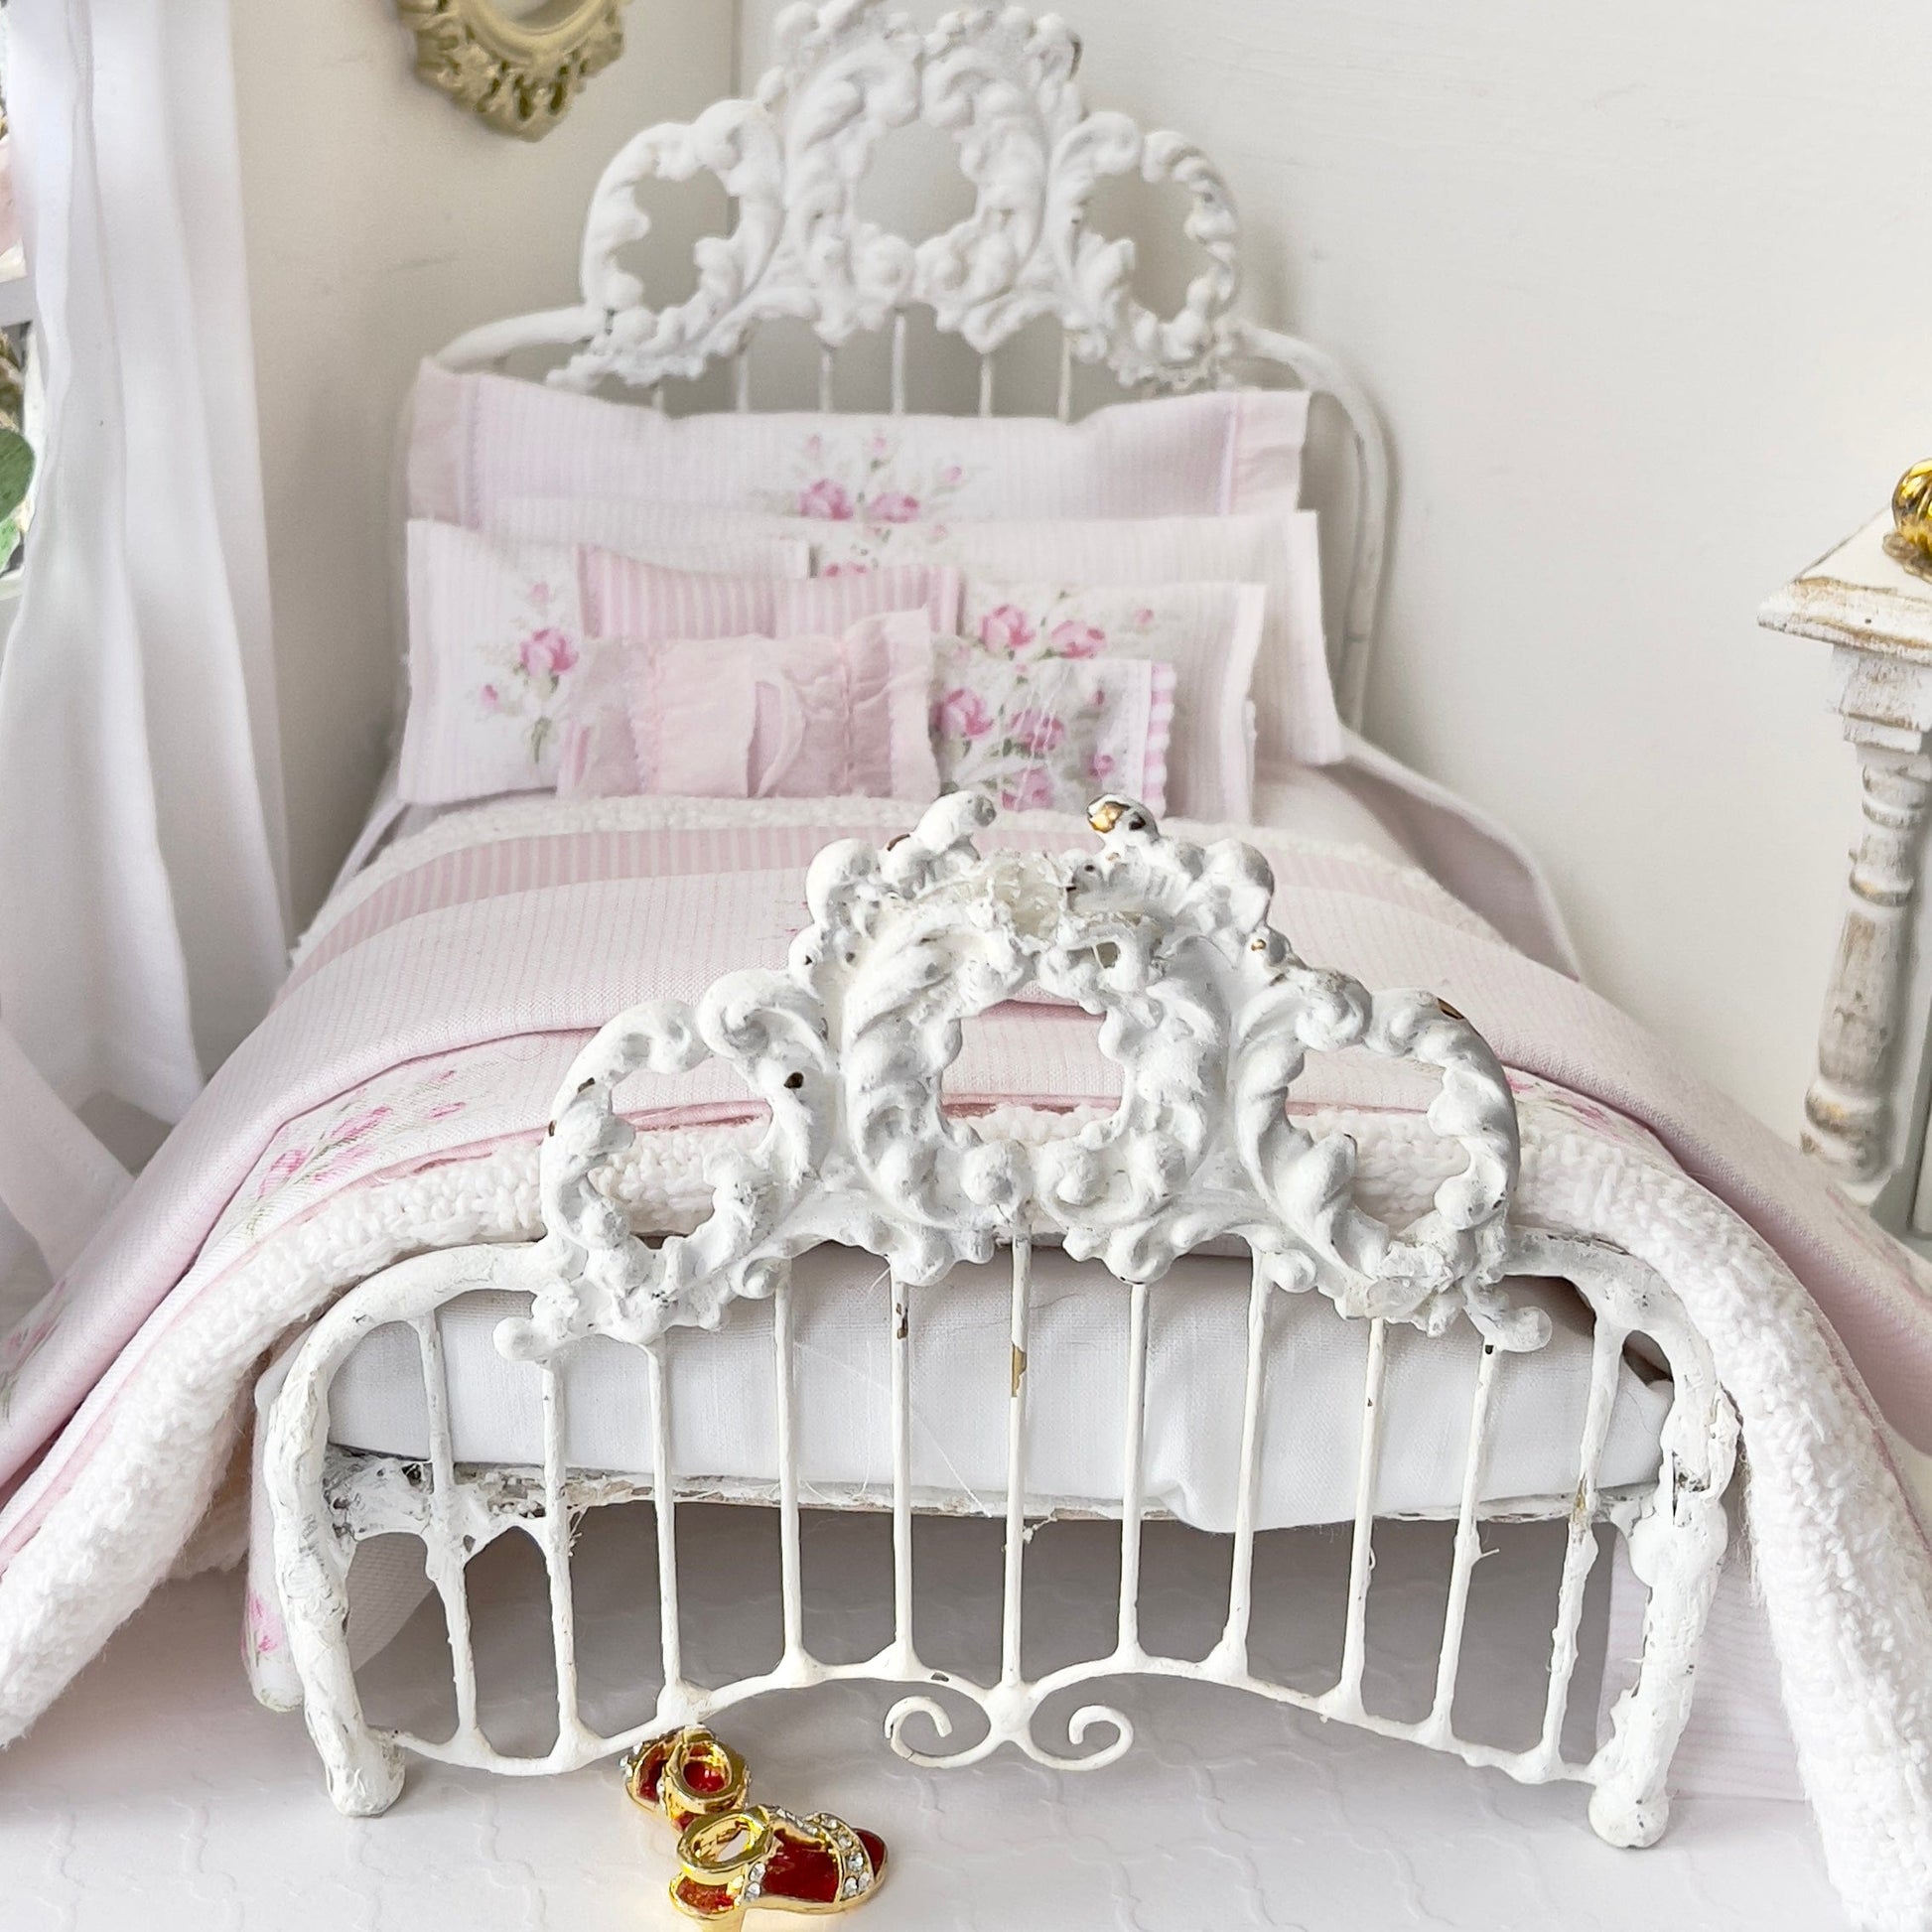 Chantallena Doll House Shabby Cottage | Eight Piece Blue and Pink Floral Bedding Set | Brooke